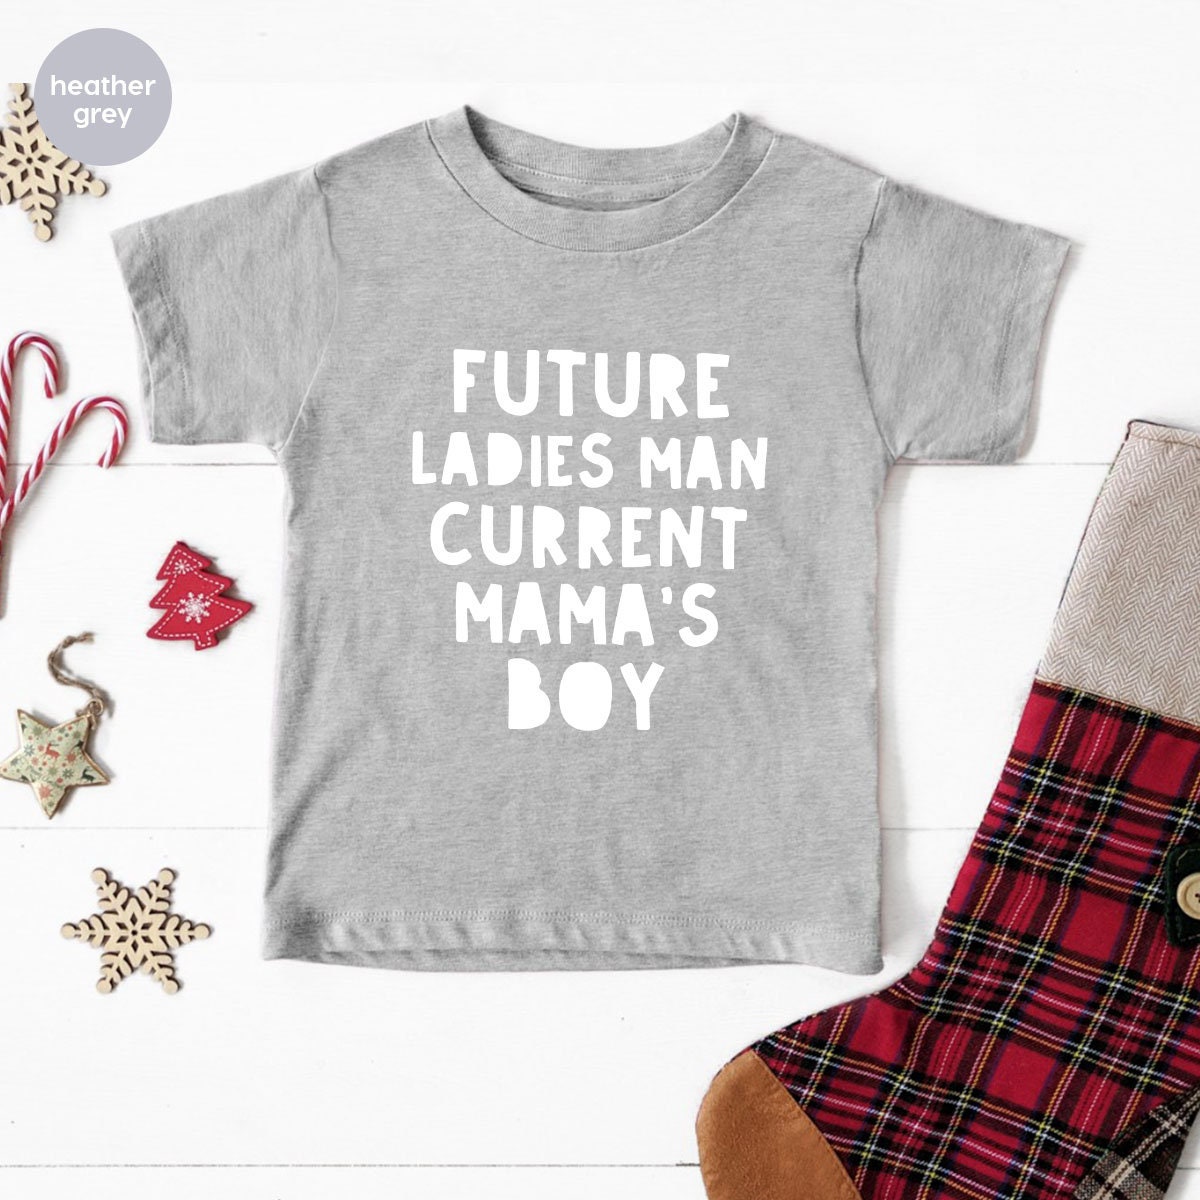 Cute Baby Bodysuit, Mothers Day Gift, Mamas Boy T Shirt, Funny Toddler TShirt, Future Ladies Man Current Mama's Boy Shirts, Boys Outfit - Fastdeliverytees.com